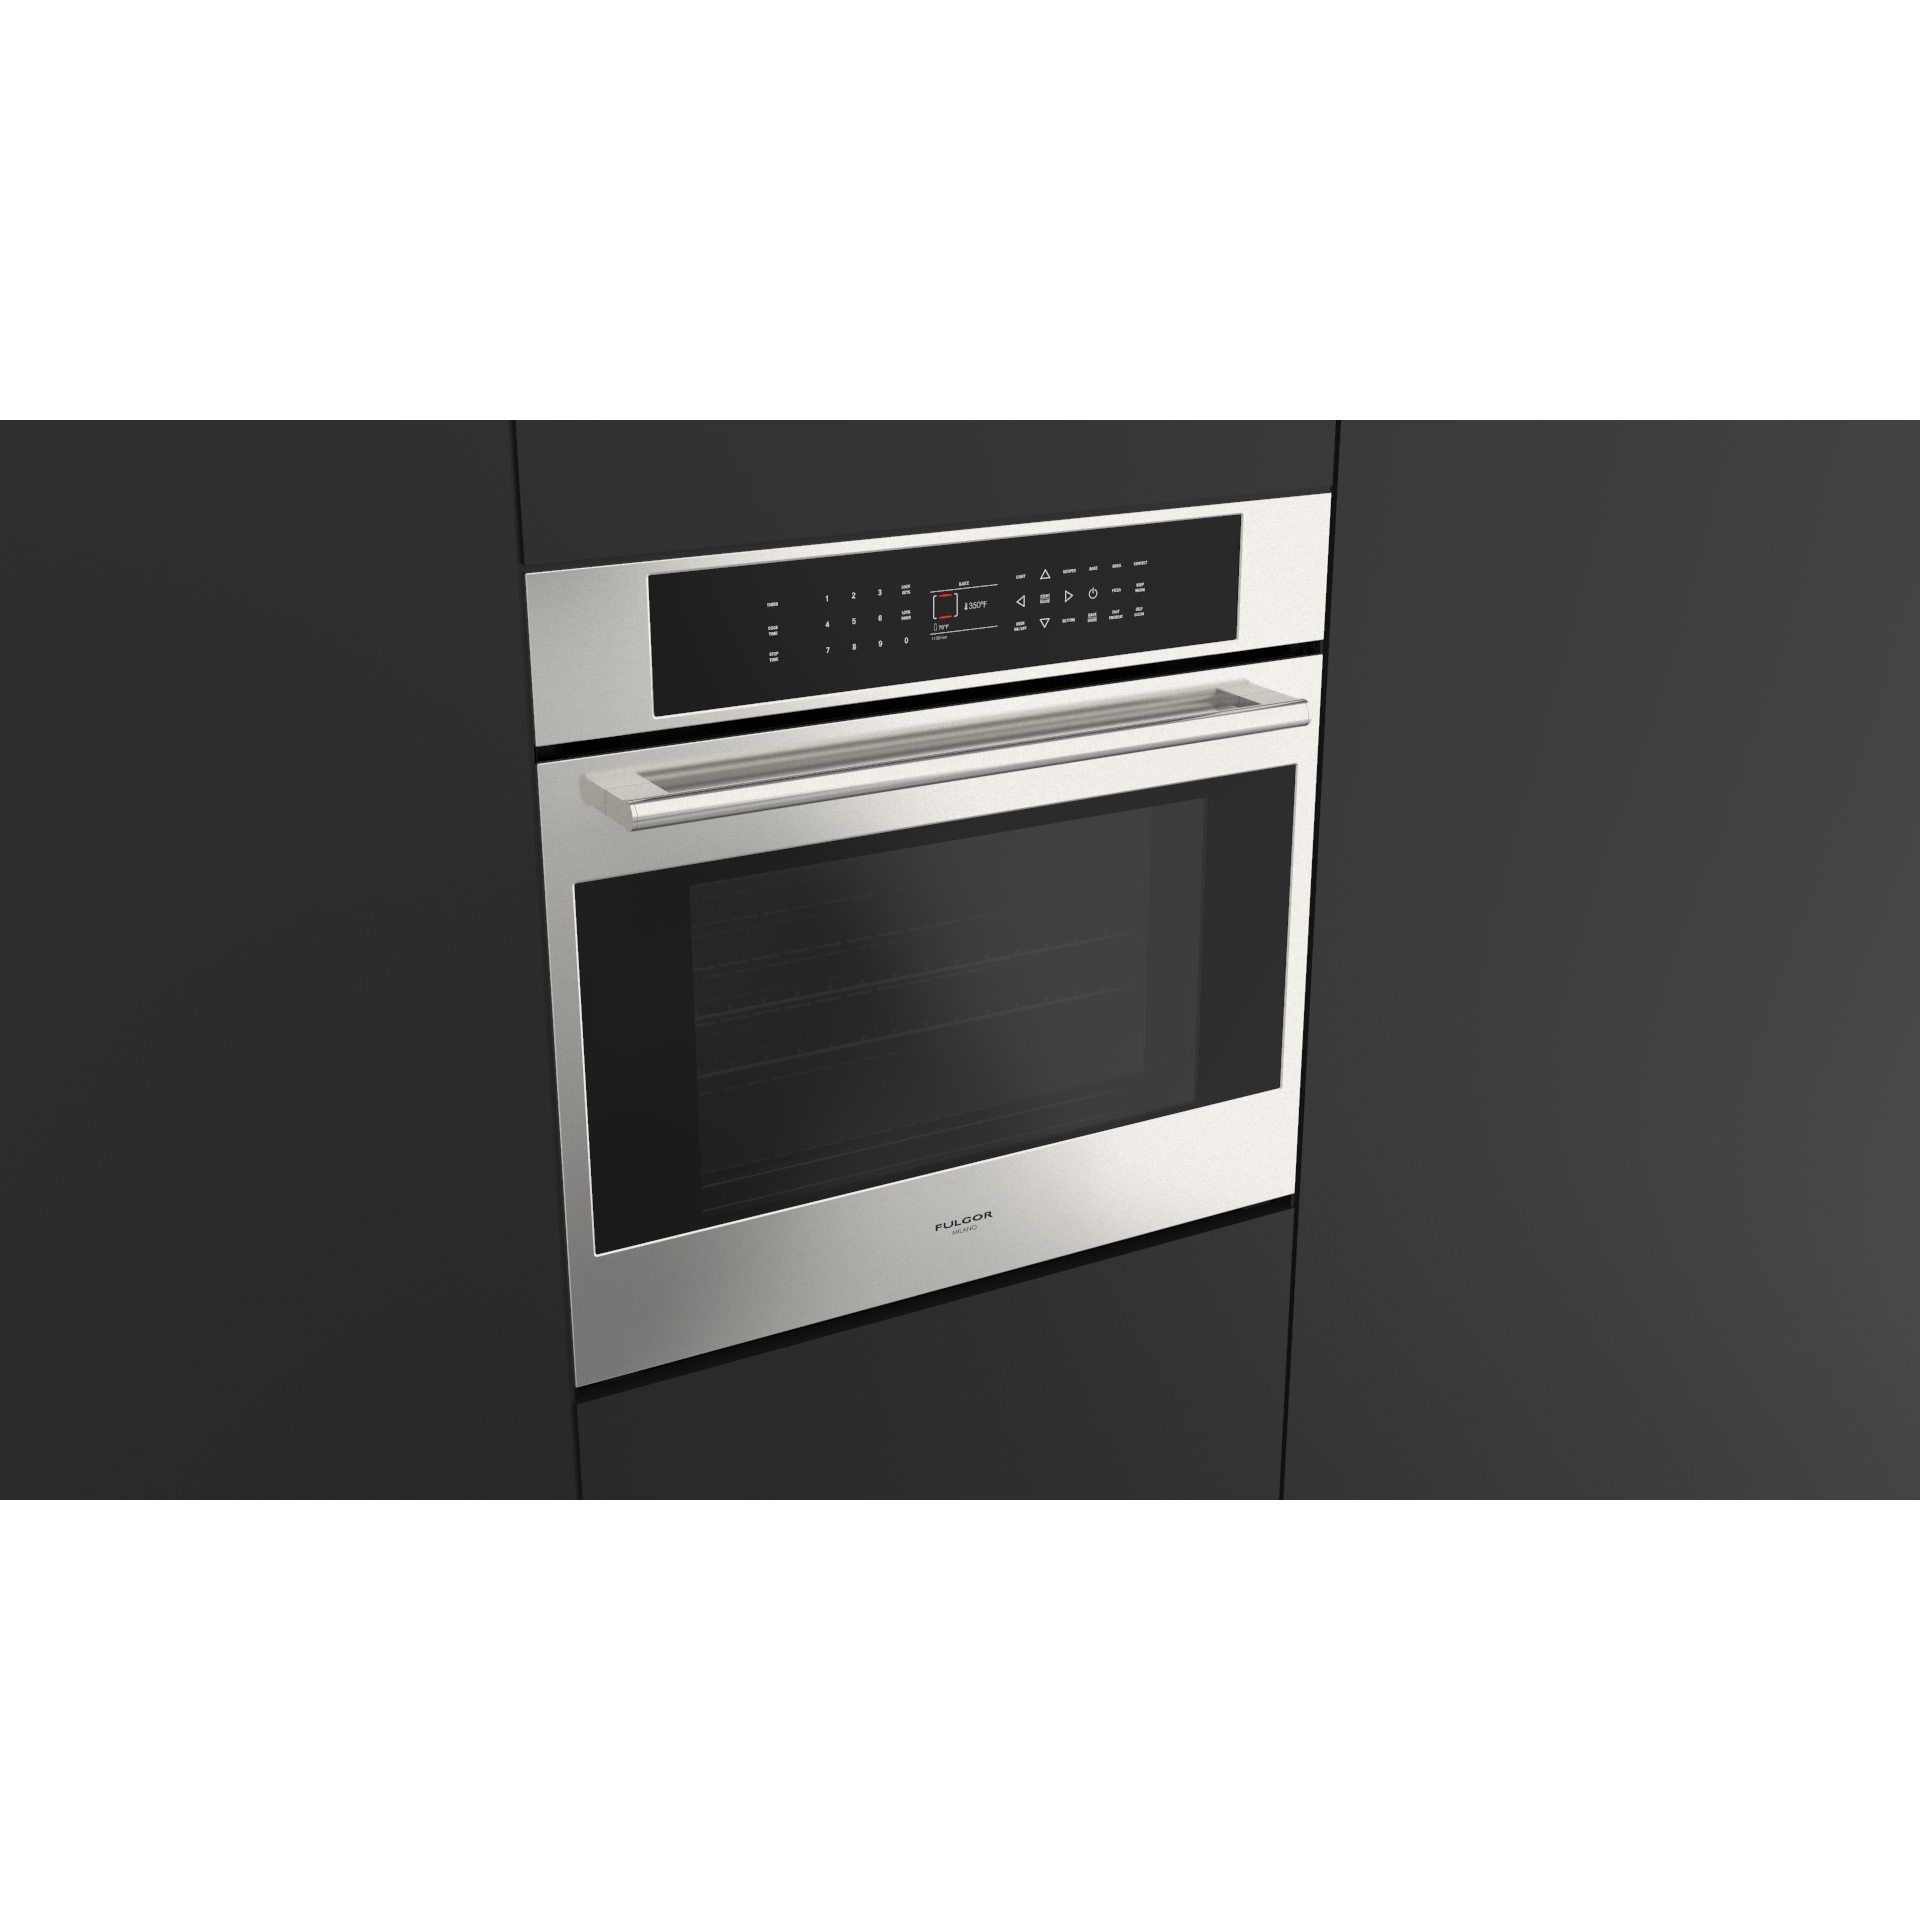 Fulgor Milano Package 30" Electric Wall Oven, 36" French Door Refrigerator, 36" Induction Cooktop,  36" Wall Mount Range Hood and 24" Built-In Dishwasher Wall Oven F7SP30S1F7IT36S1 Luxury Appliances Direct